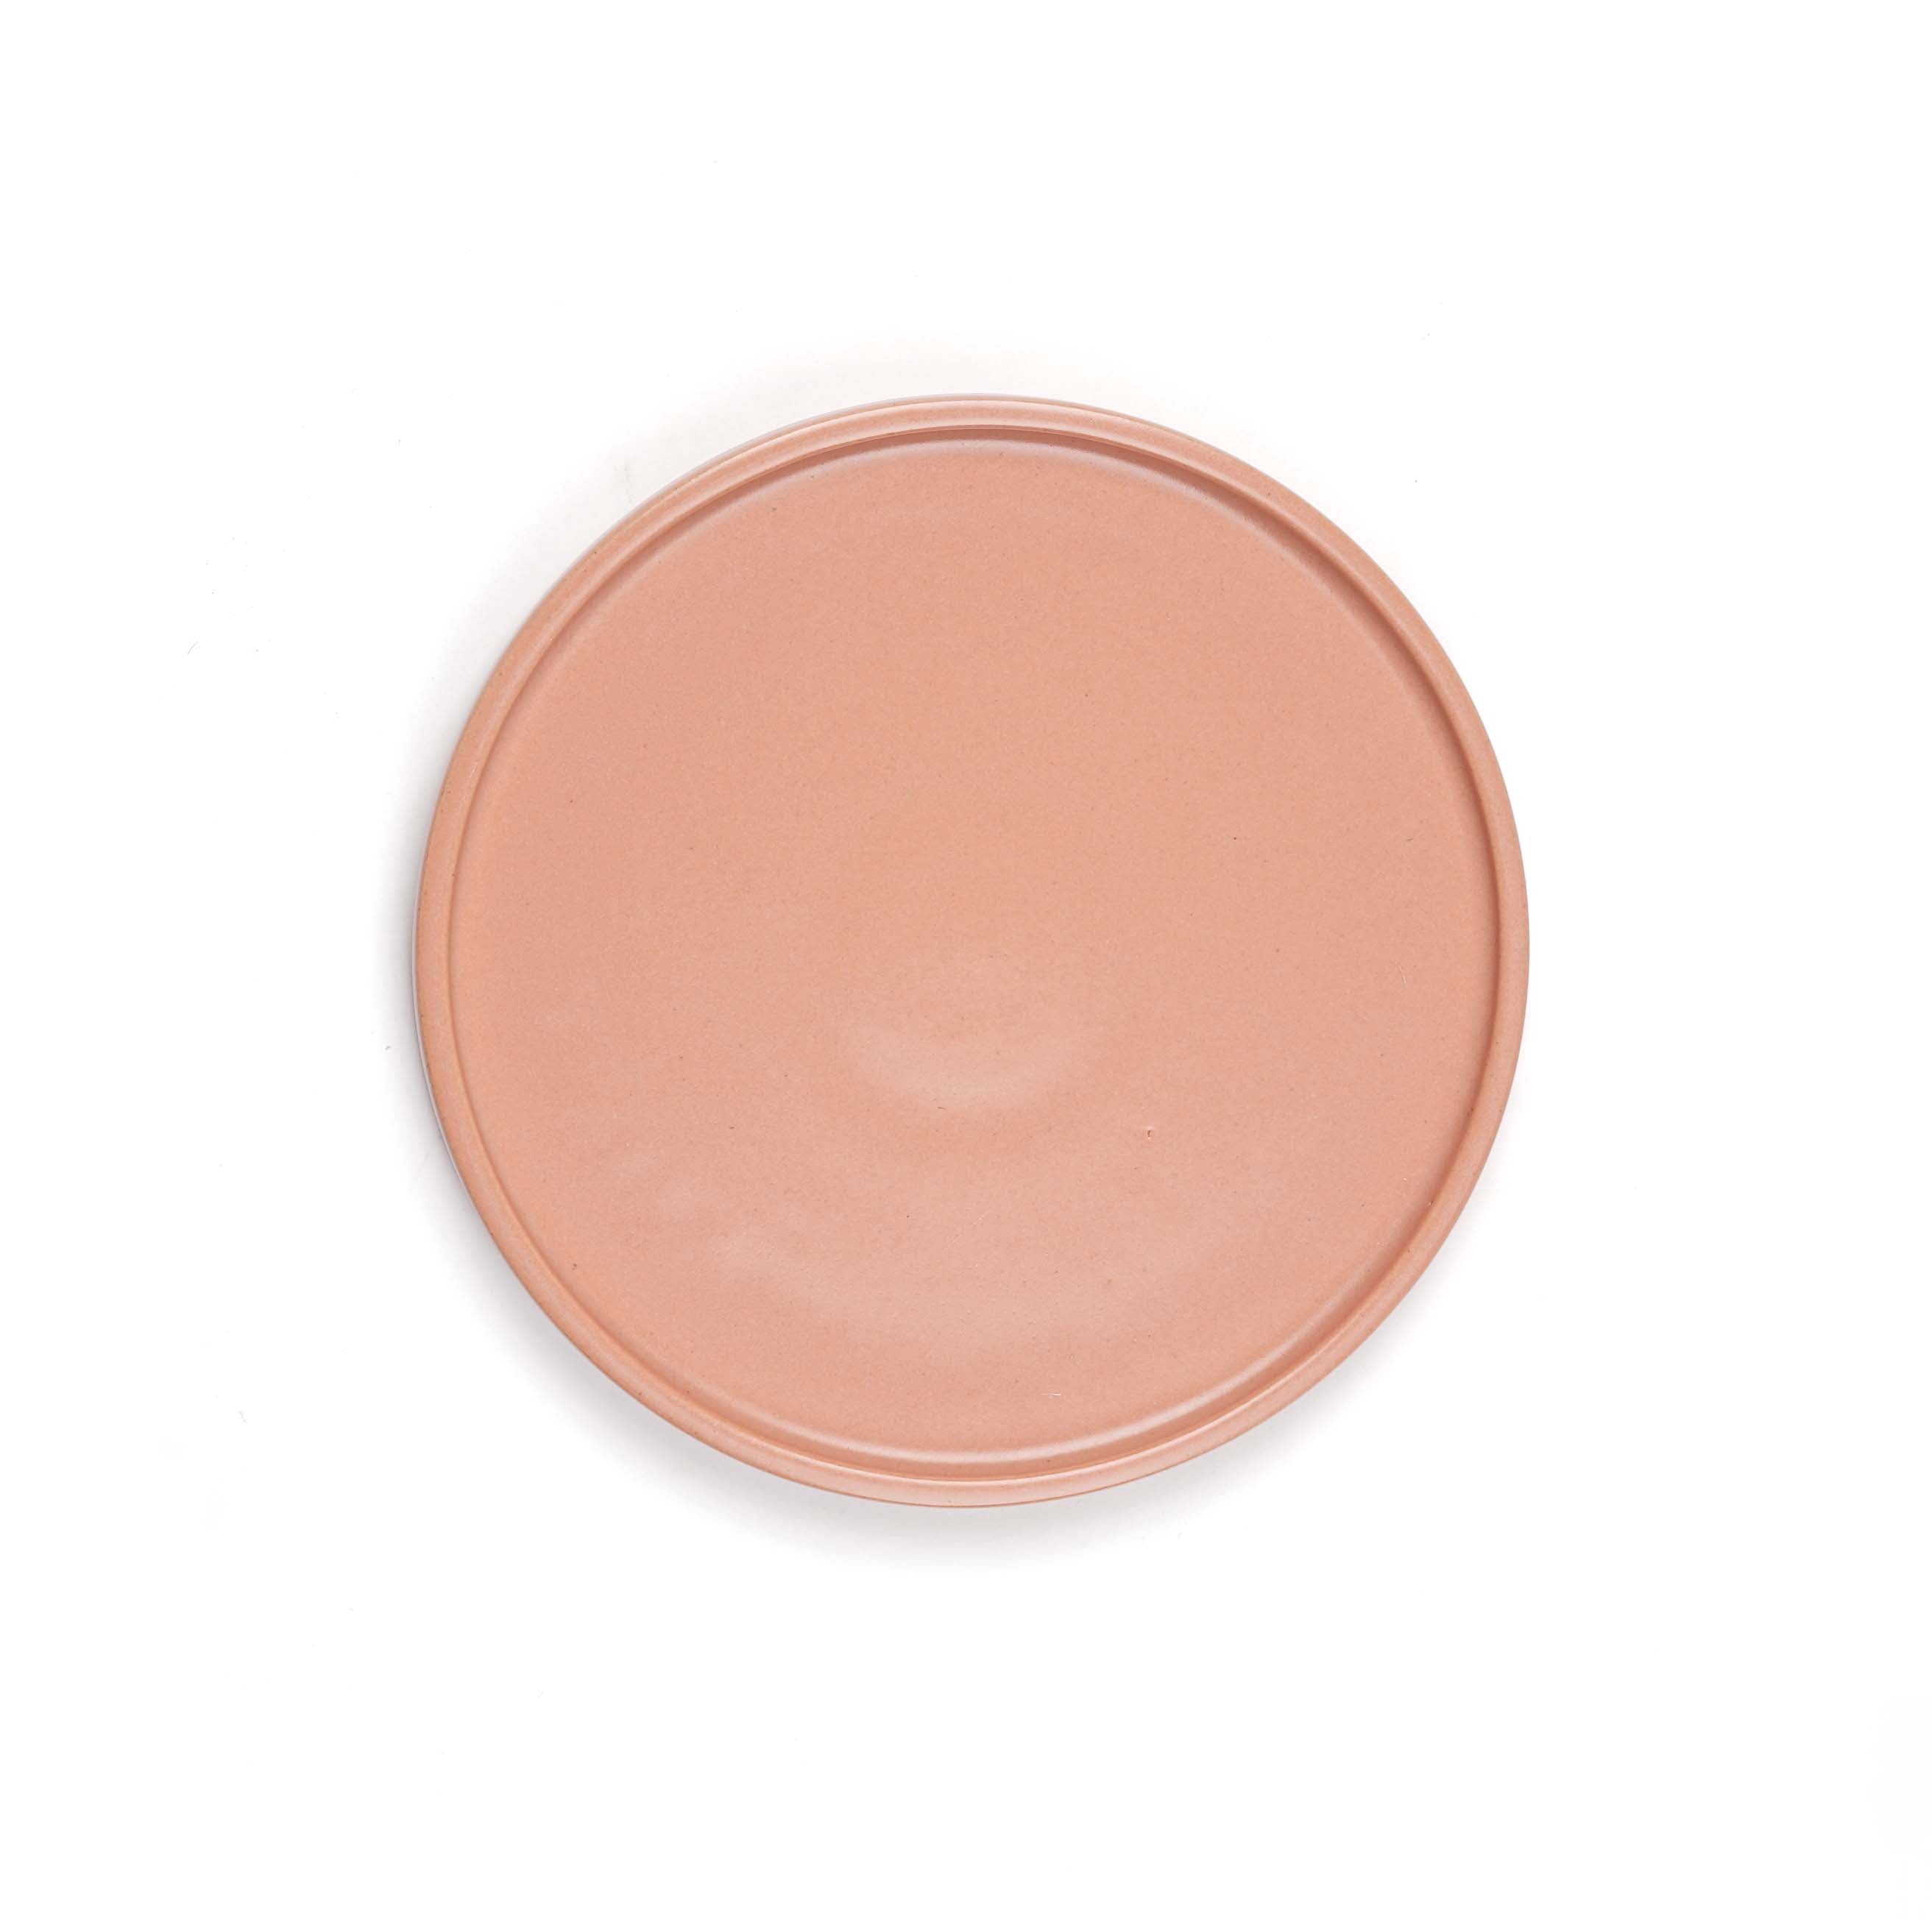 Stack Starter Plate 8- Coral set of 2, Microwave and Dishwasher Safe. Hand wash with mild detergents.